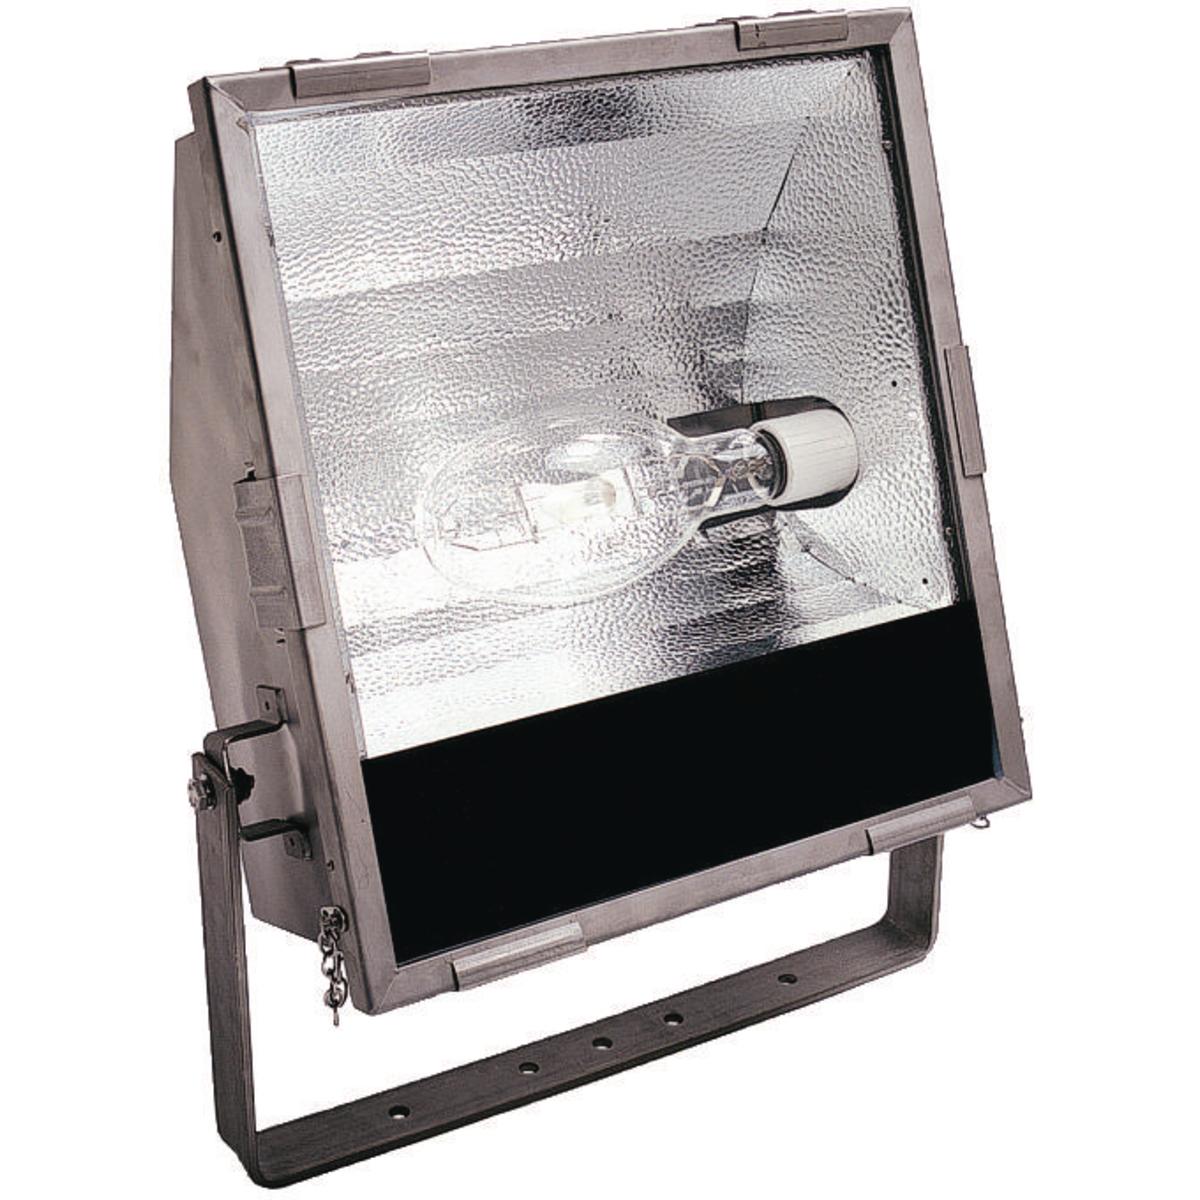 Hubbell KFS400-SSNR KFSS Series - Stainless Steel 400 Watt High Pressure Sodium Ex nR Marine Floodlight (Lamp Not Included) - Quadri-Volt (120/208/240/277V) At 60Hz  ; Type 316 Stainless Steel Housing. 16-gauge housing ensures low corrosion and long life, reducing maintenanc